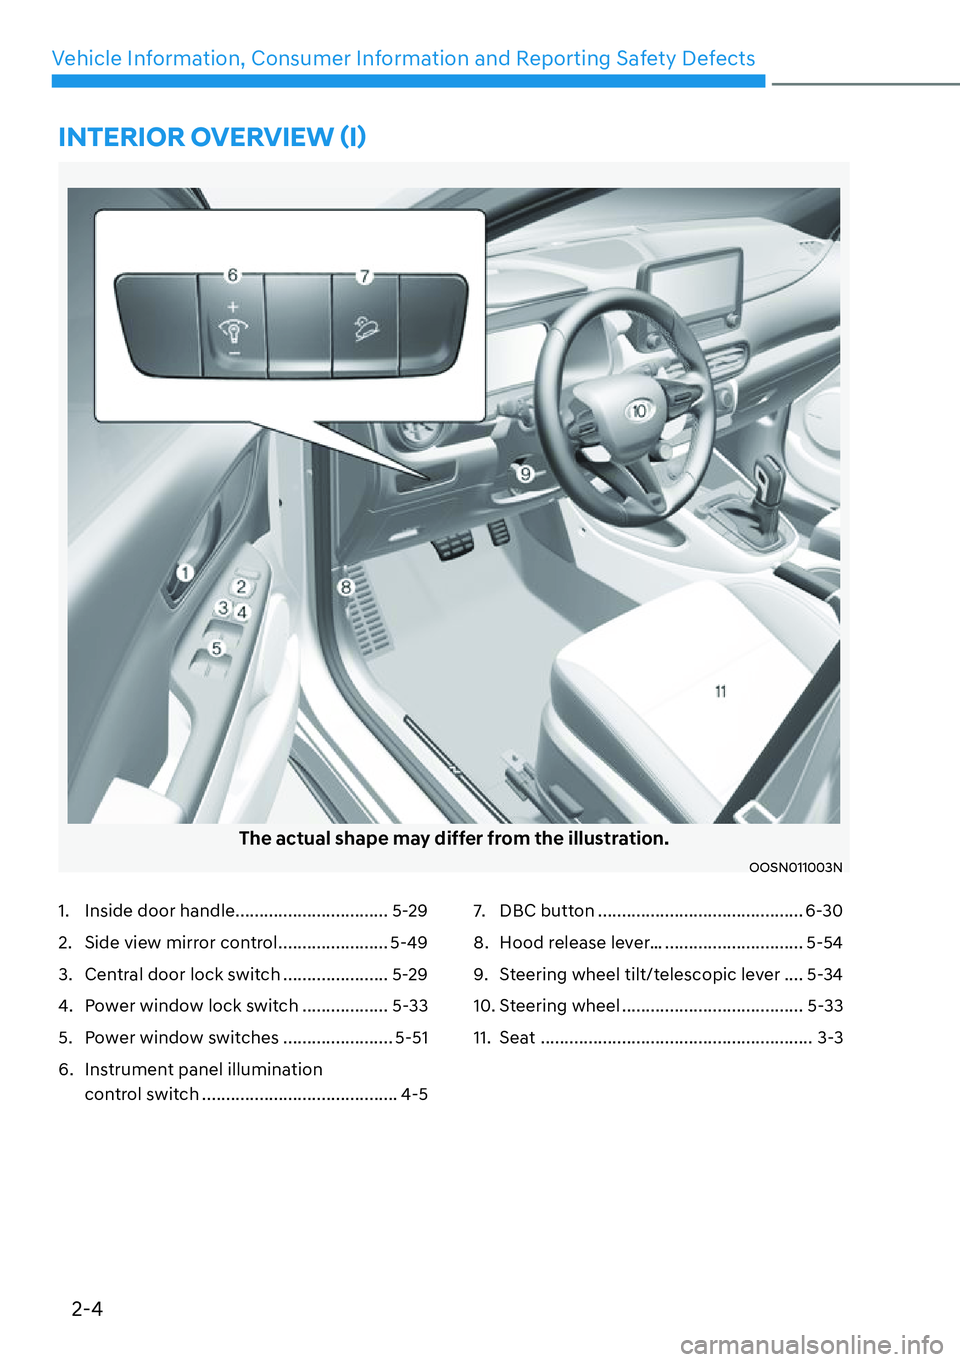 HYUNDAI KONA 2023 User Guide 2-4
Vehicle Information, Consumer Information and Reporting Safety Defects
1.  Inside door handle ................................ 5-29
2.  Side view mirror control ....................... 5-49
3.  Ce